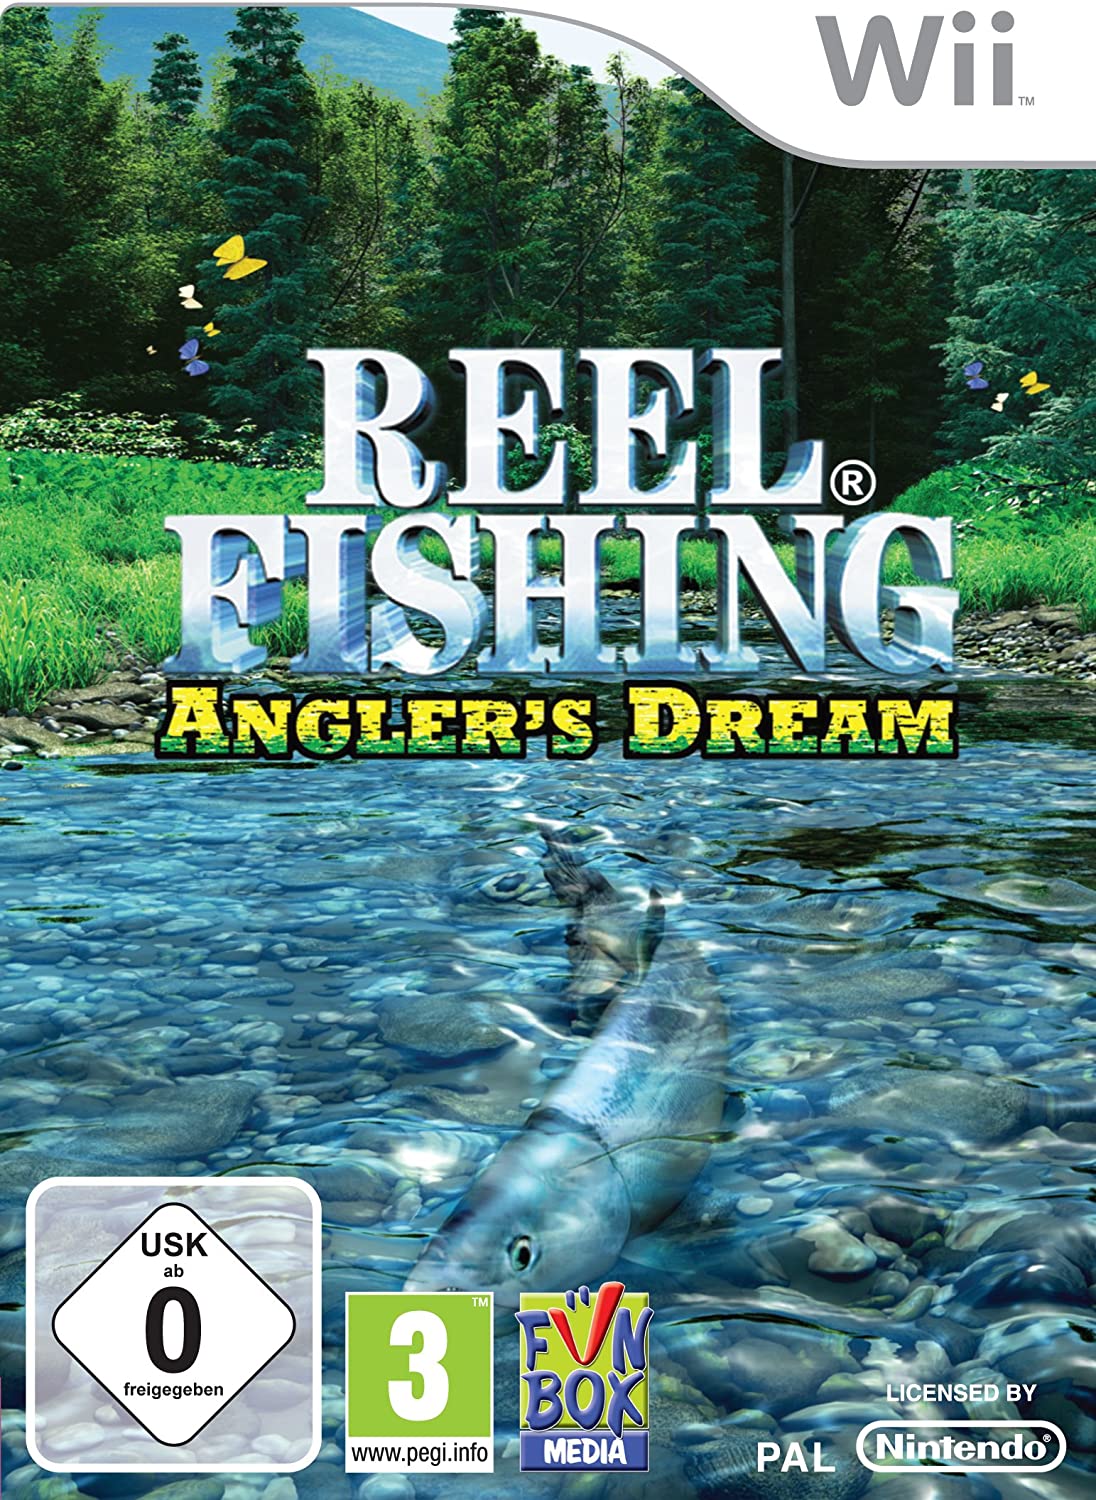 Reel Fishing: Angler’s Dream player count stats